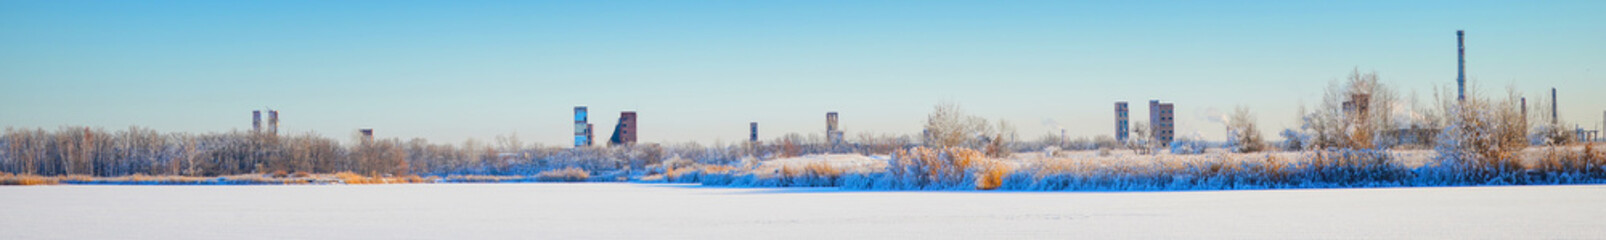 An abandoned old chemical plant on the bank of a frozen winter river covered with snow. Industrial winter landscape